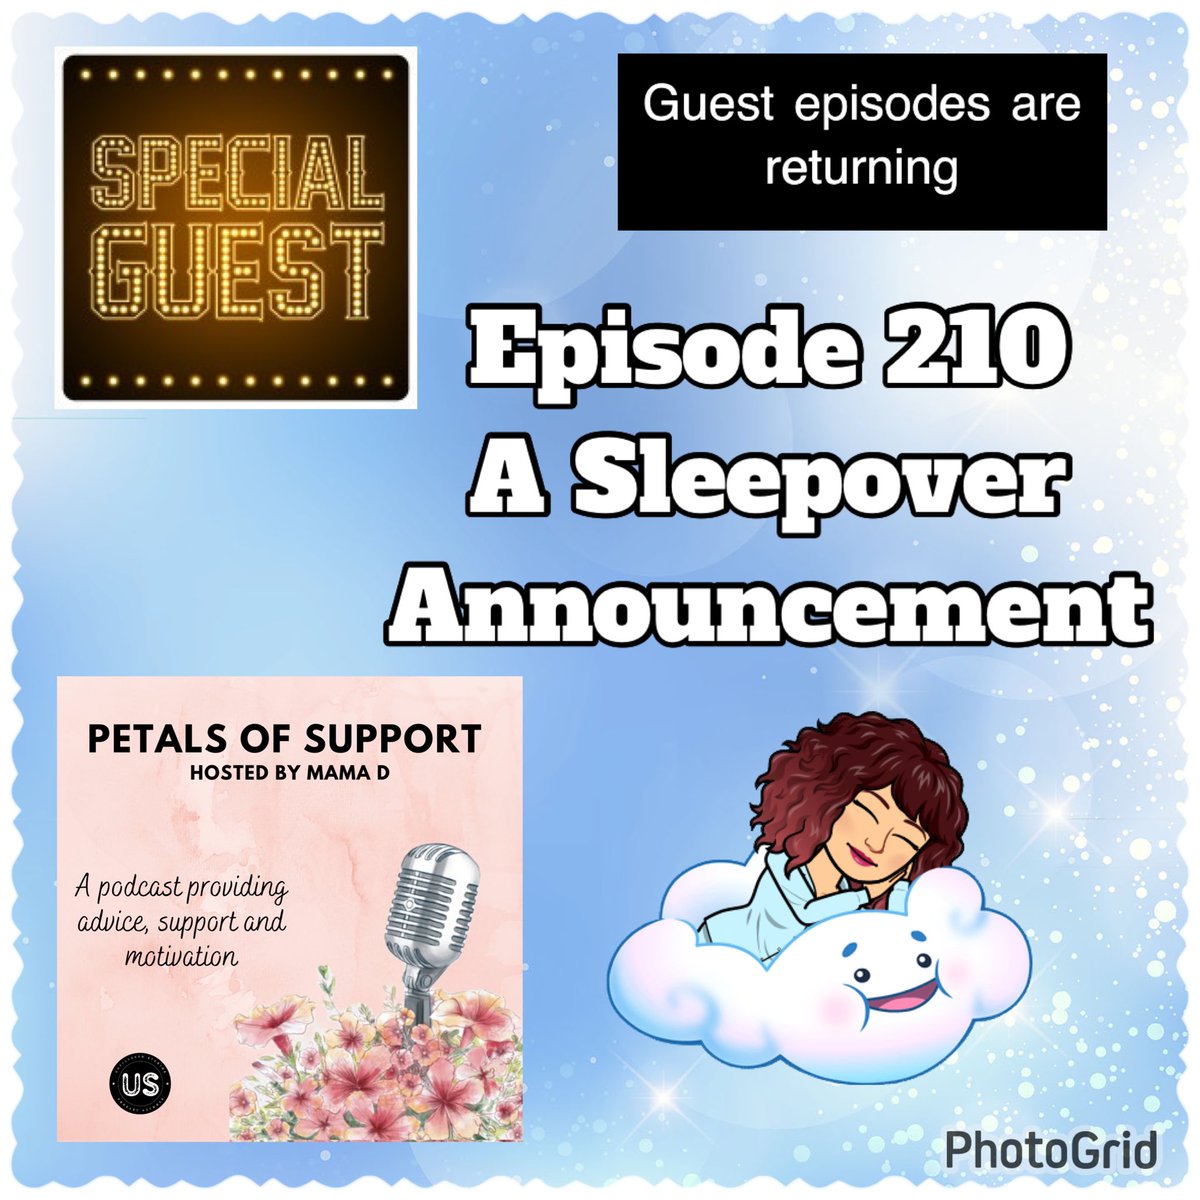 ⭐️New Episode ⭐️ Guest Episodes return in June! What is the theme and would YOU like to be a guest? Find out the details in this short episode Links in comments @unfpod #podcast #advice #support #life #stories #guests #mentalhealth #podcastandchill #success #struggle